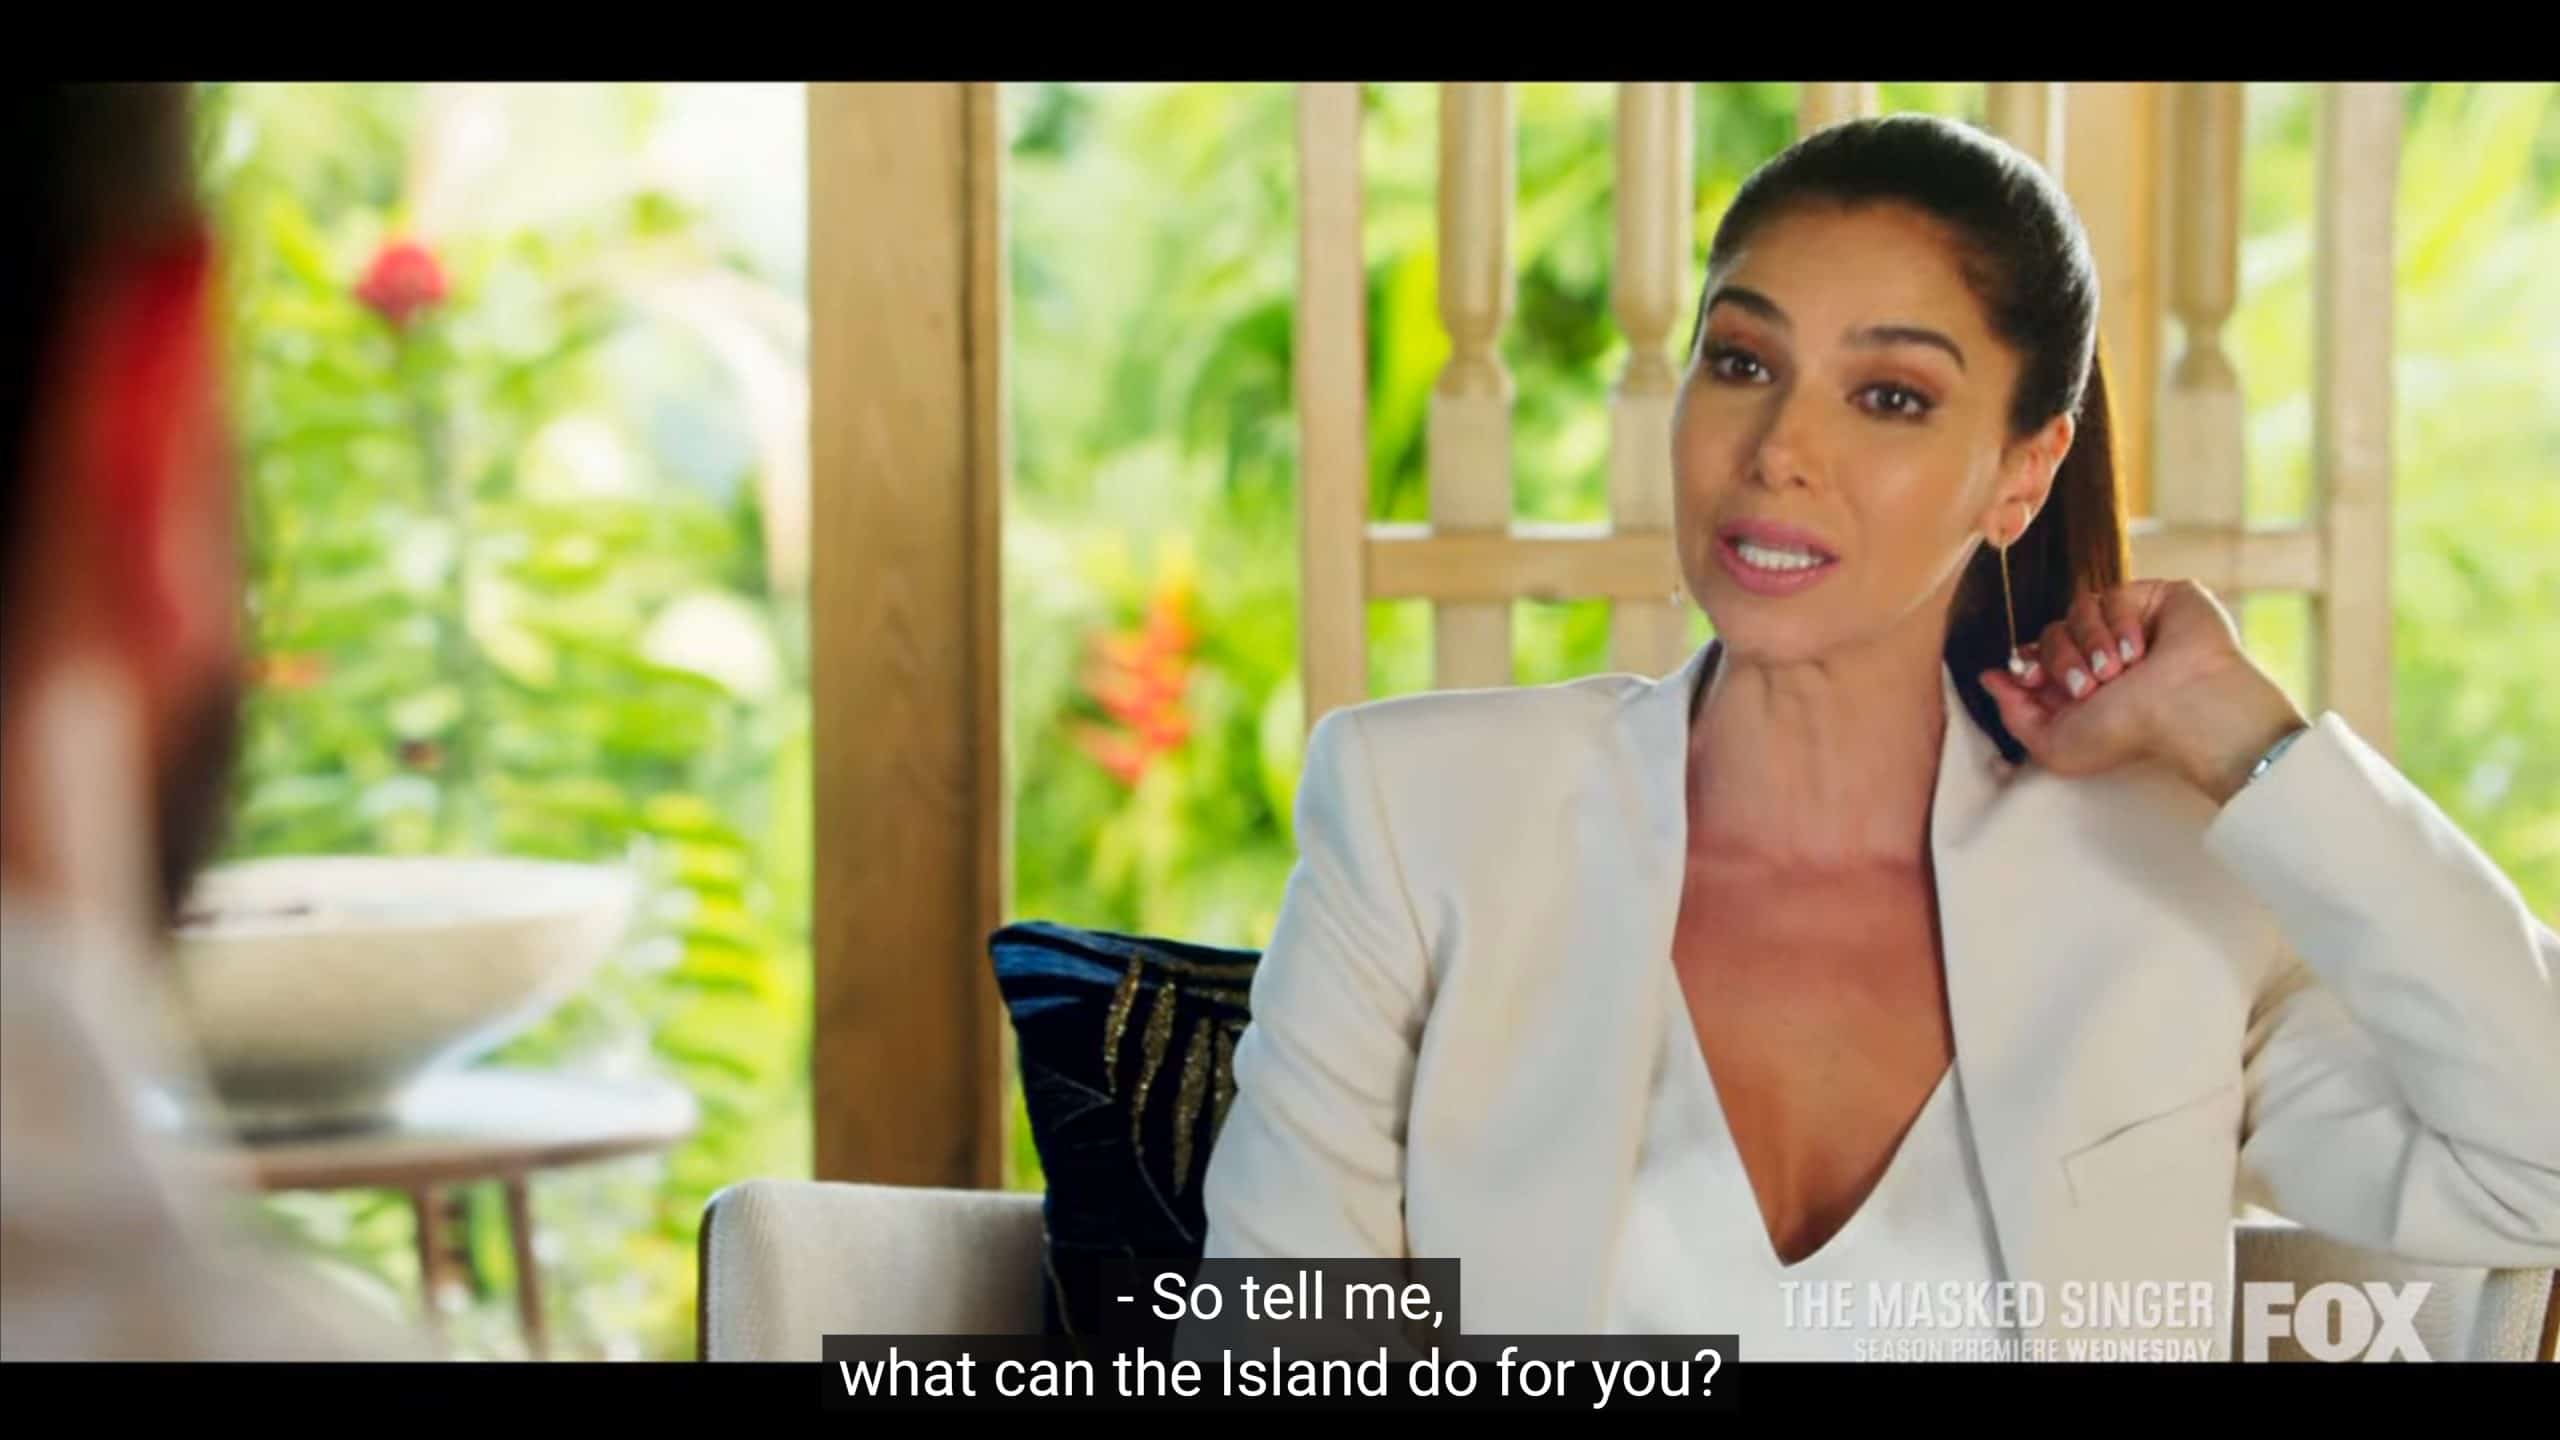 Roselyn Sanchez as Elena asking what the Island can do for someone